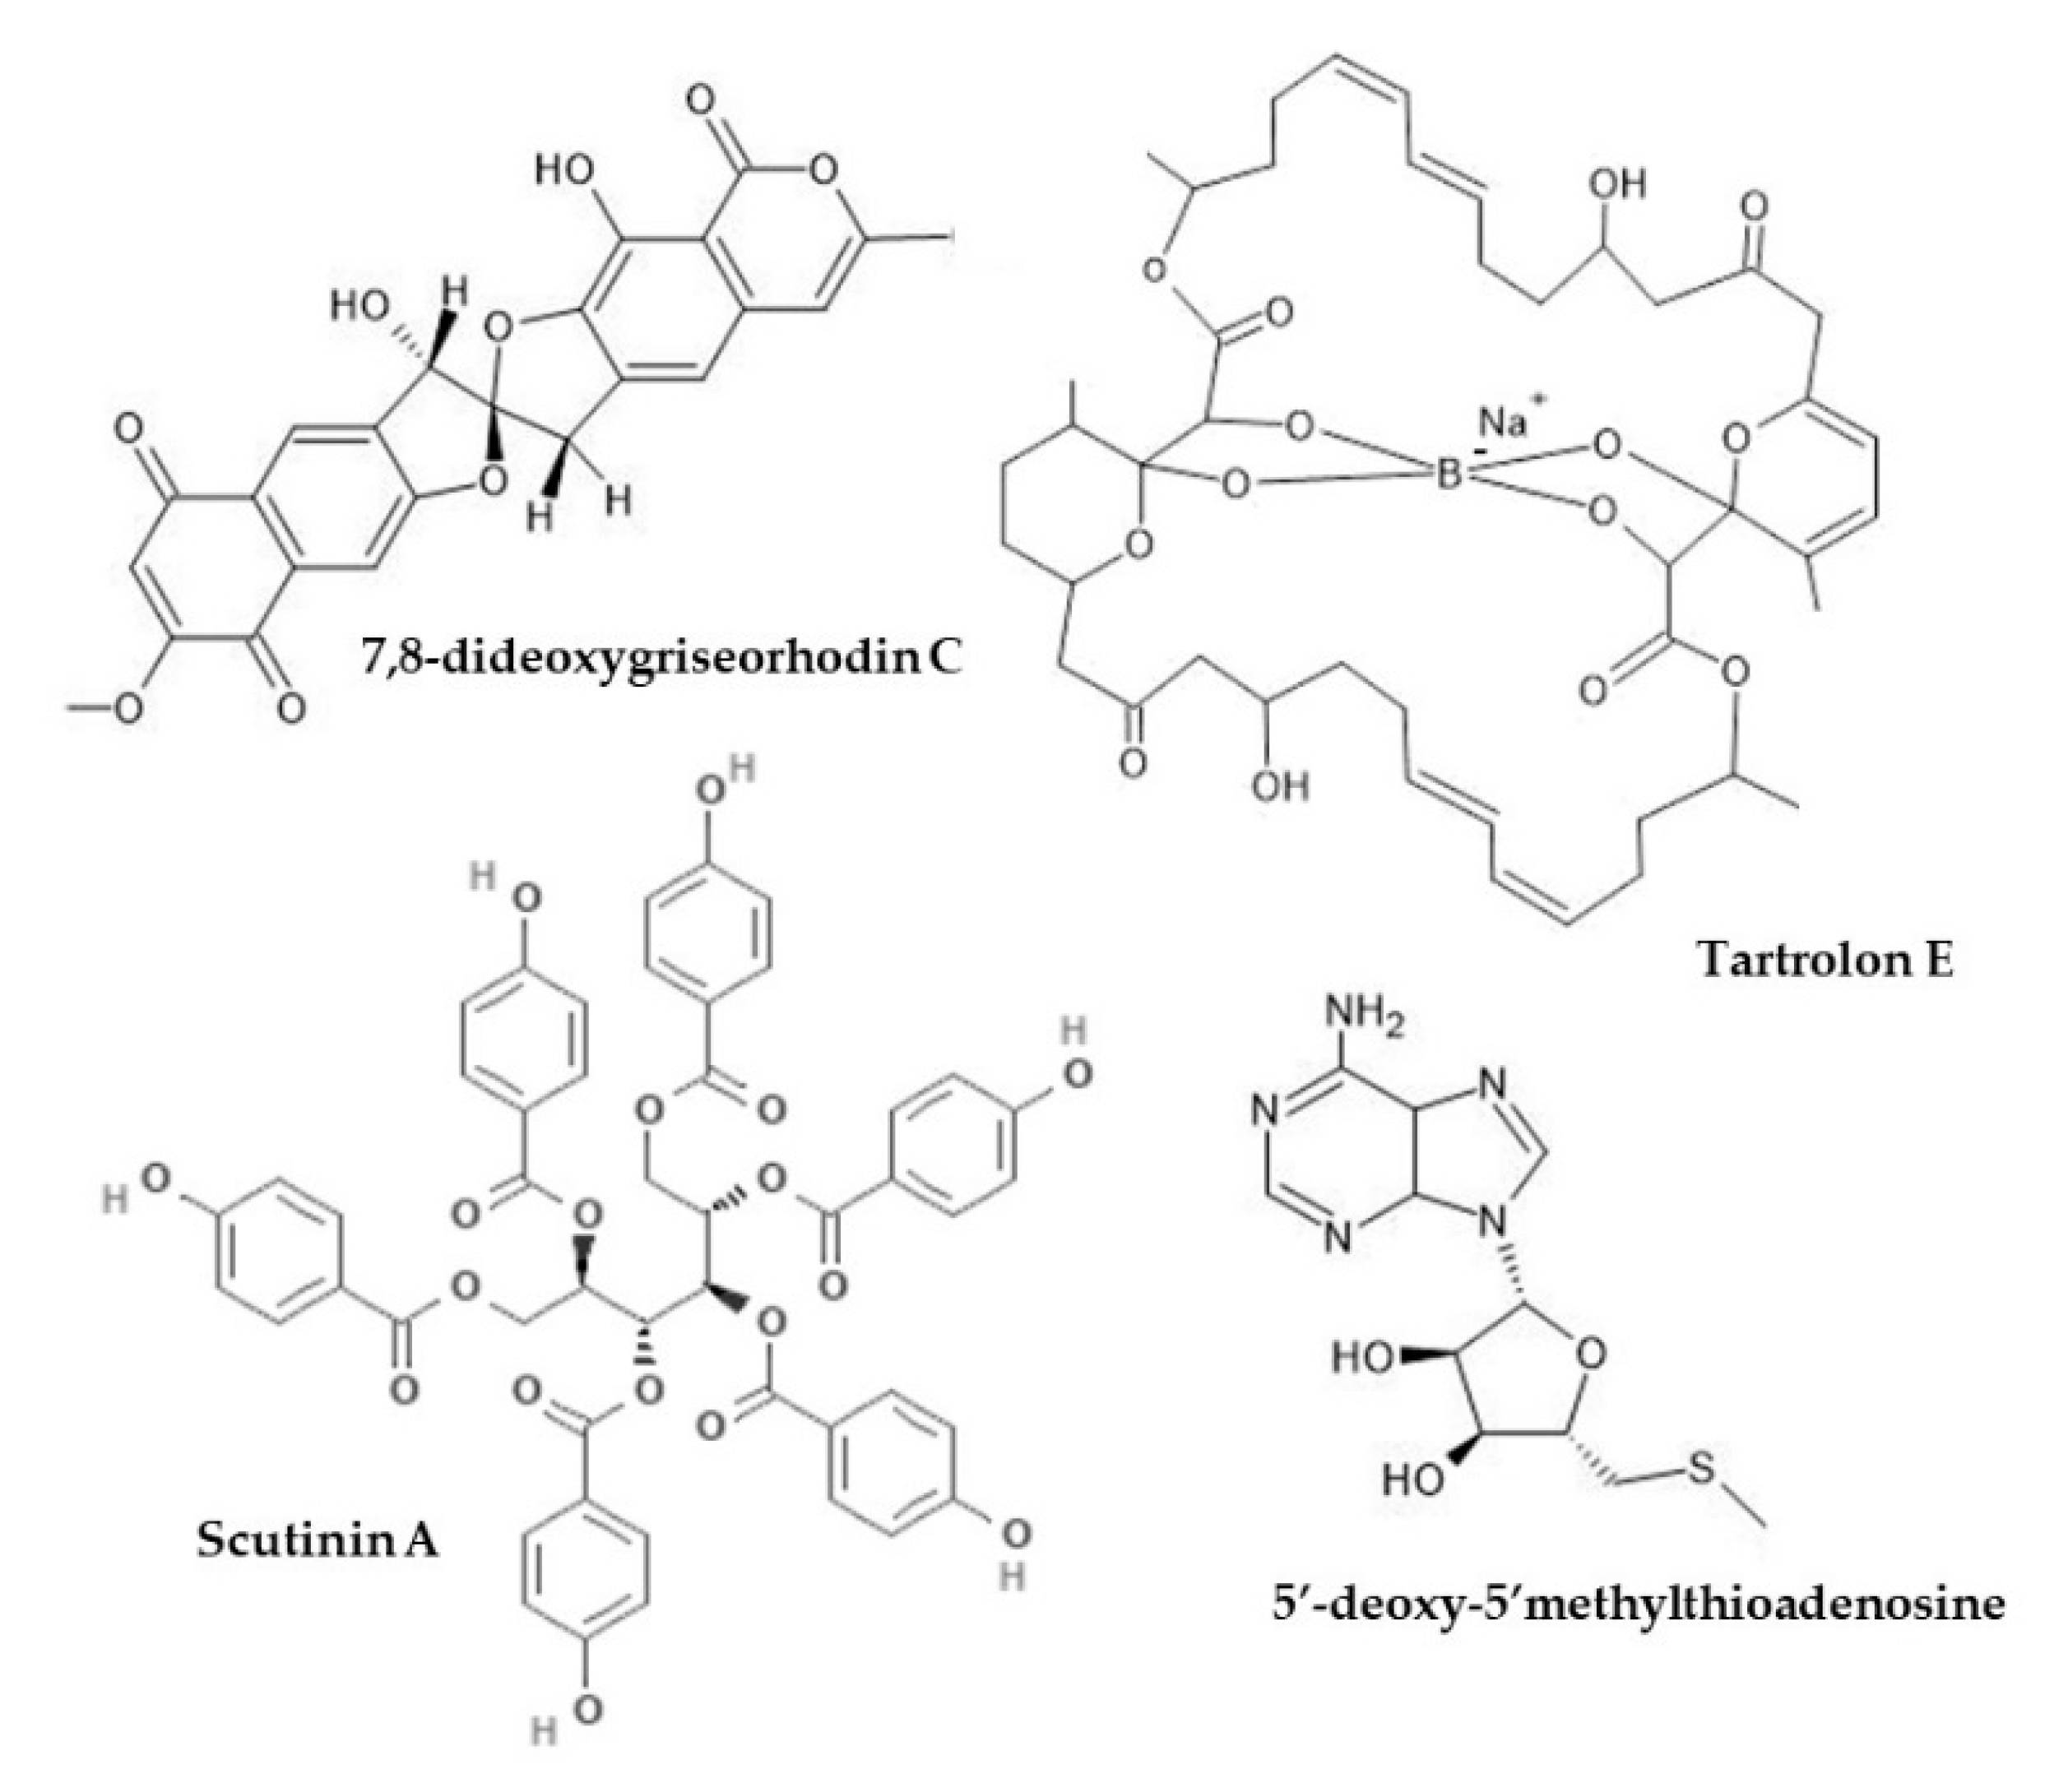 Marine Drugs | Free Full-Text | Molluscan Compounds Provide Drug Leads for  the Treatment and Prevention of Respiratory Disease | HTML